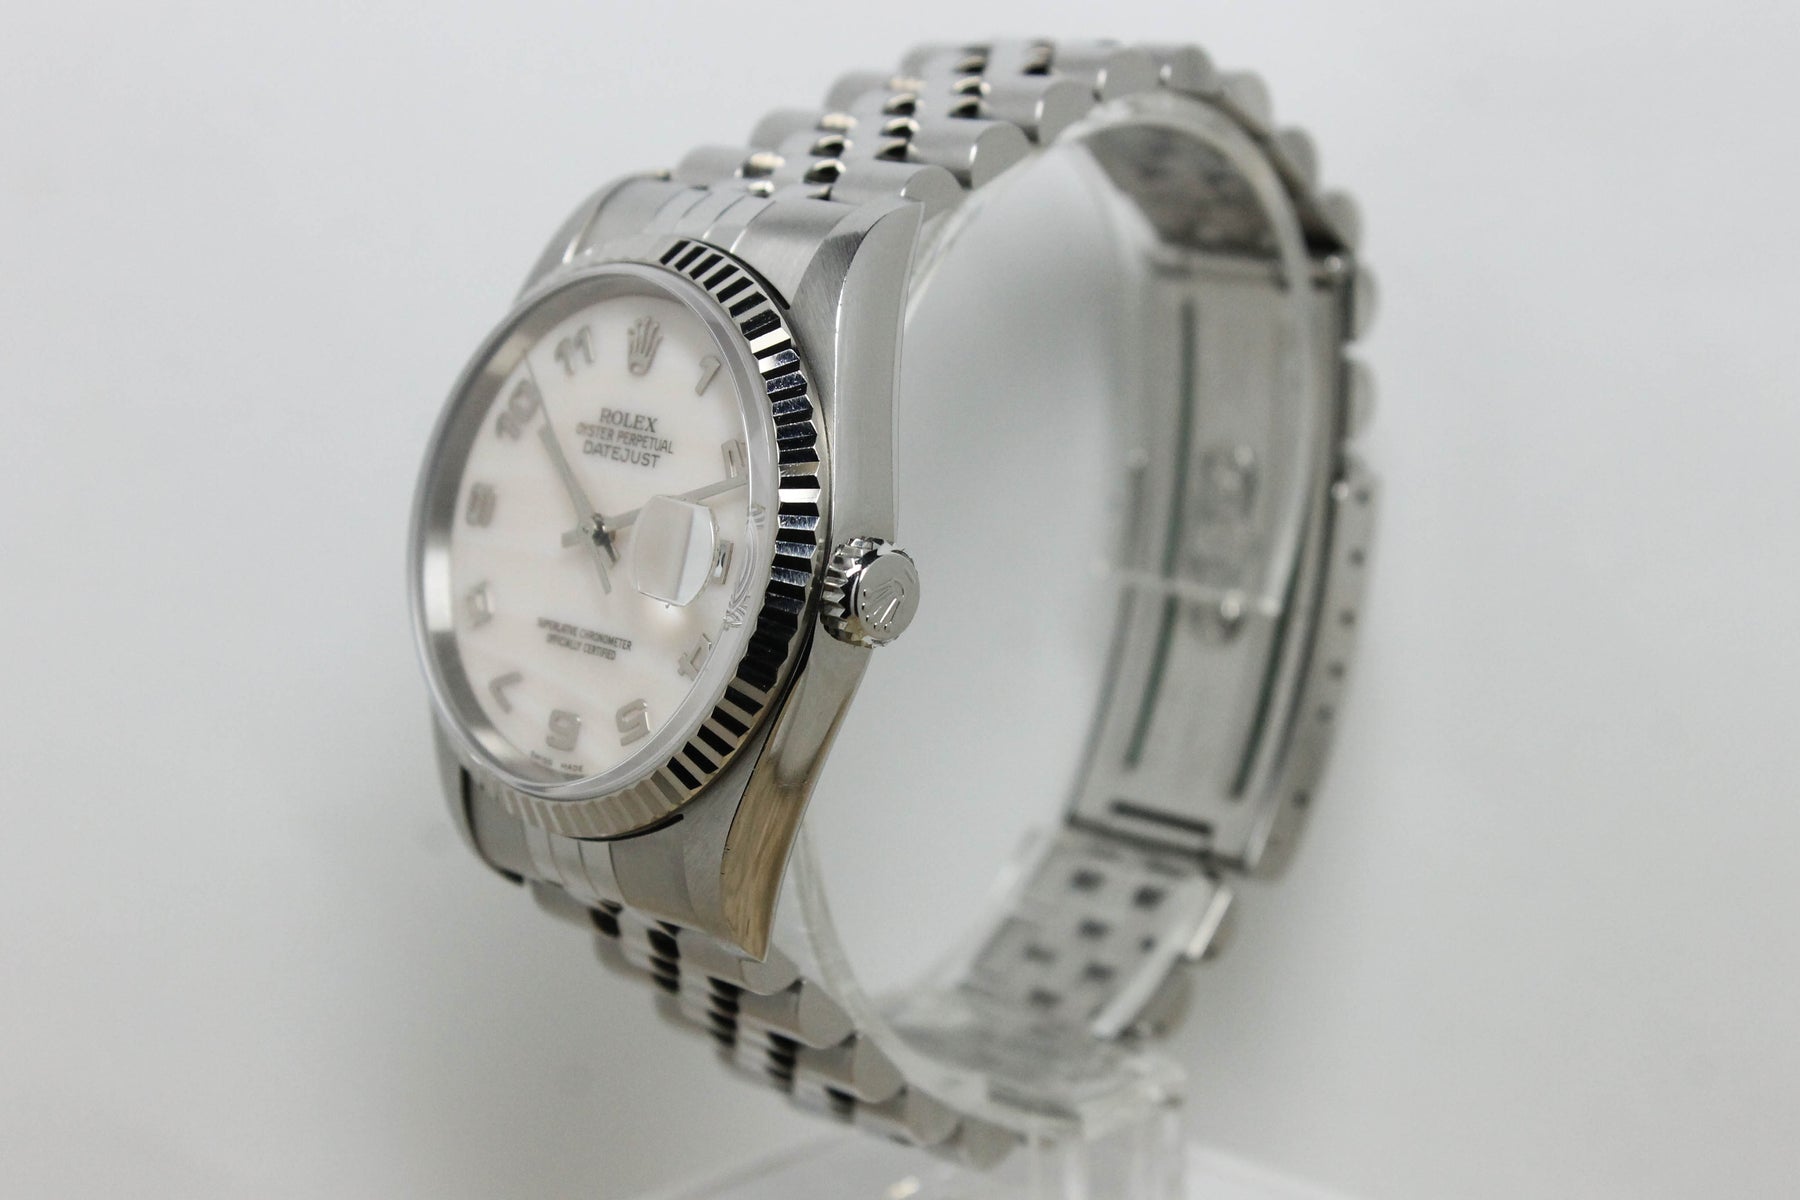 1997 Rolex Datejust Pink Mother of Pearl Dial Ref. 16234 (with Papers)